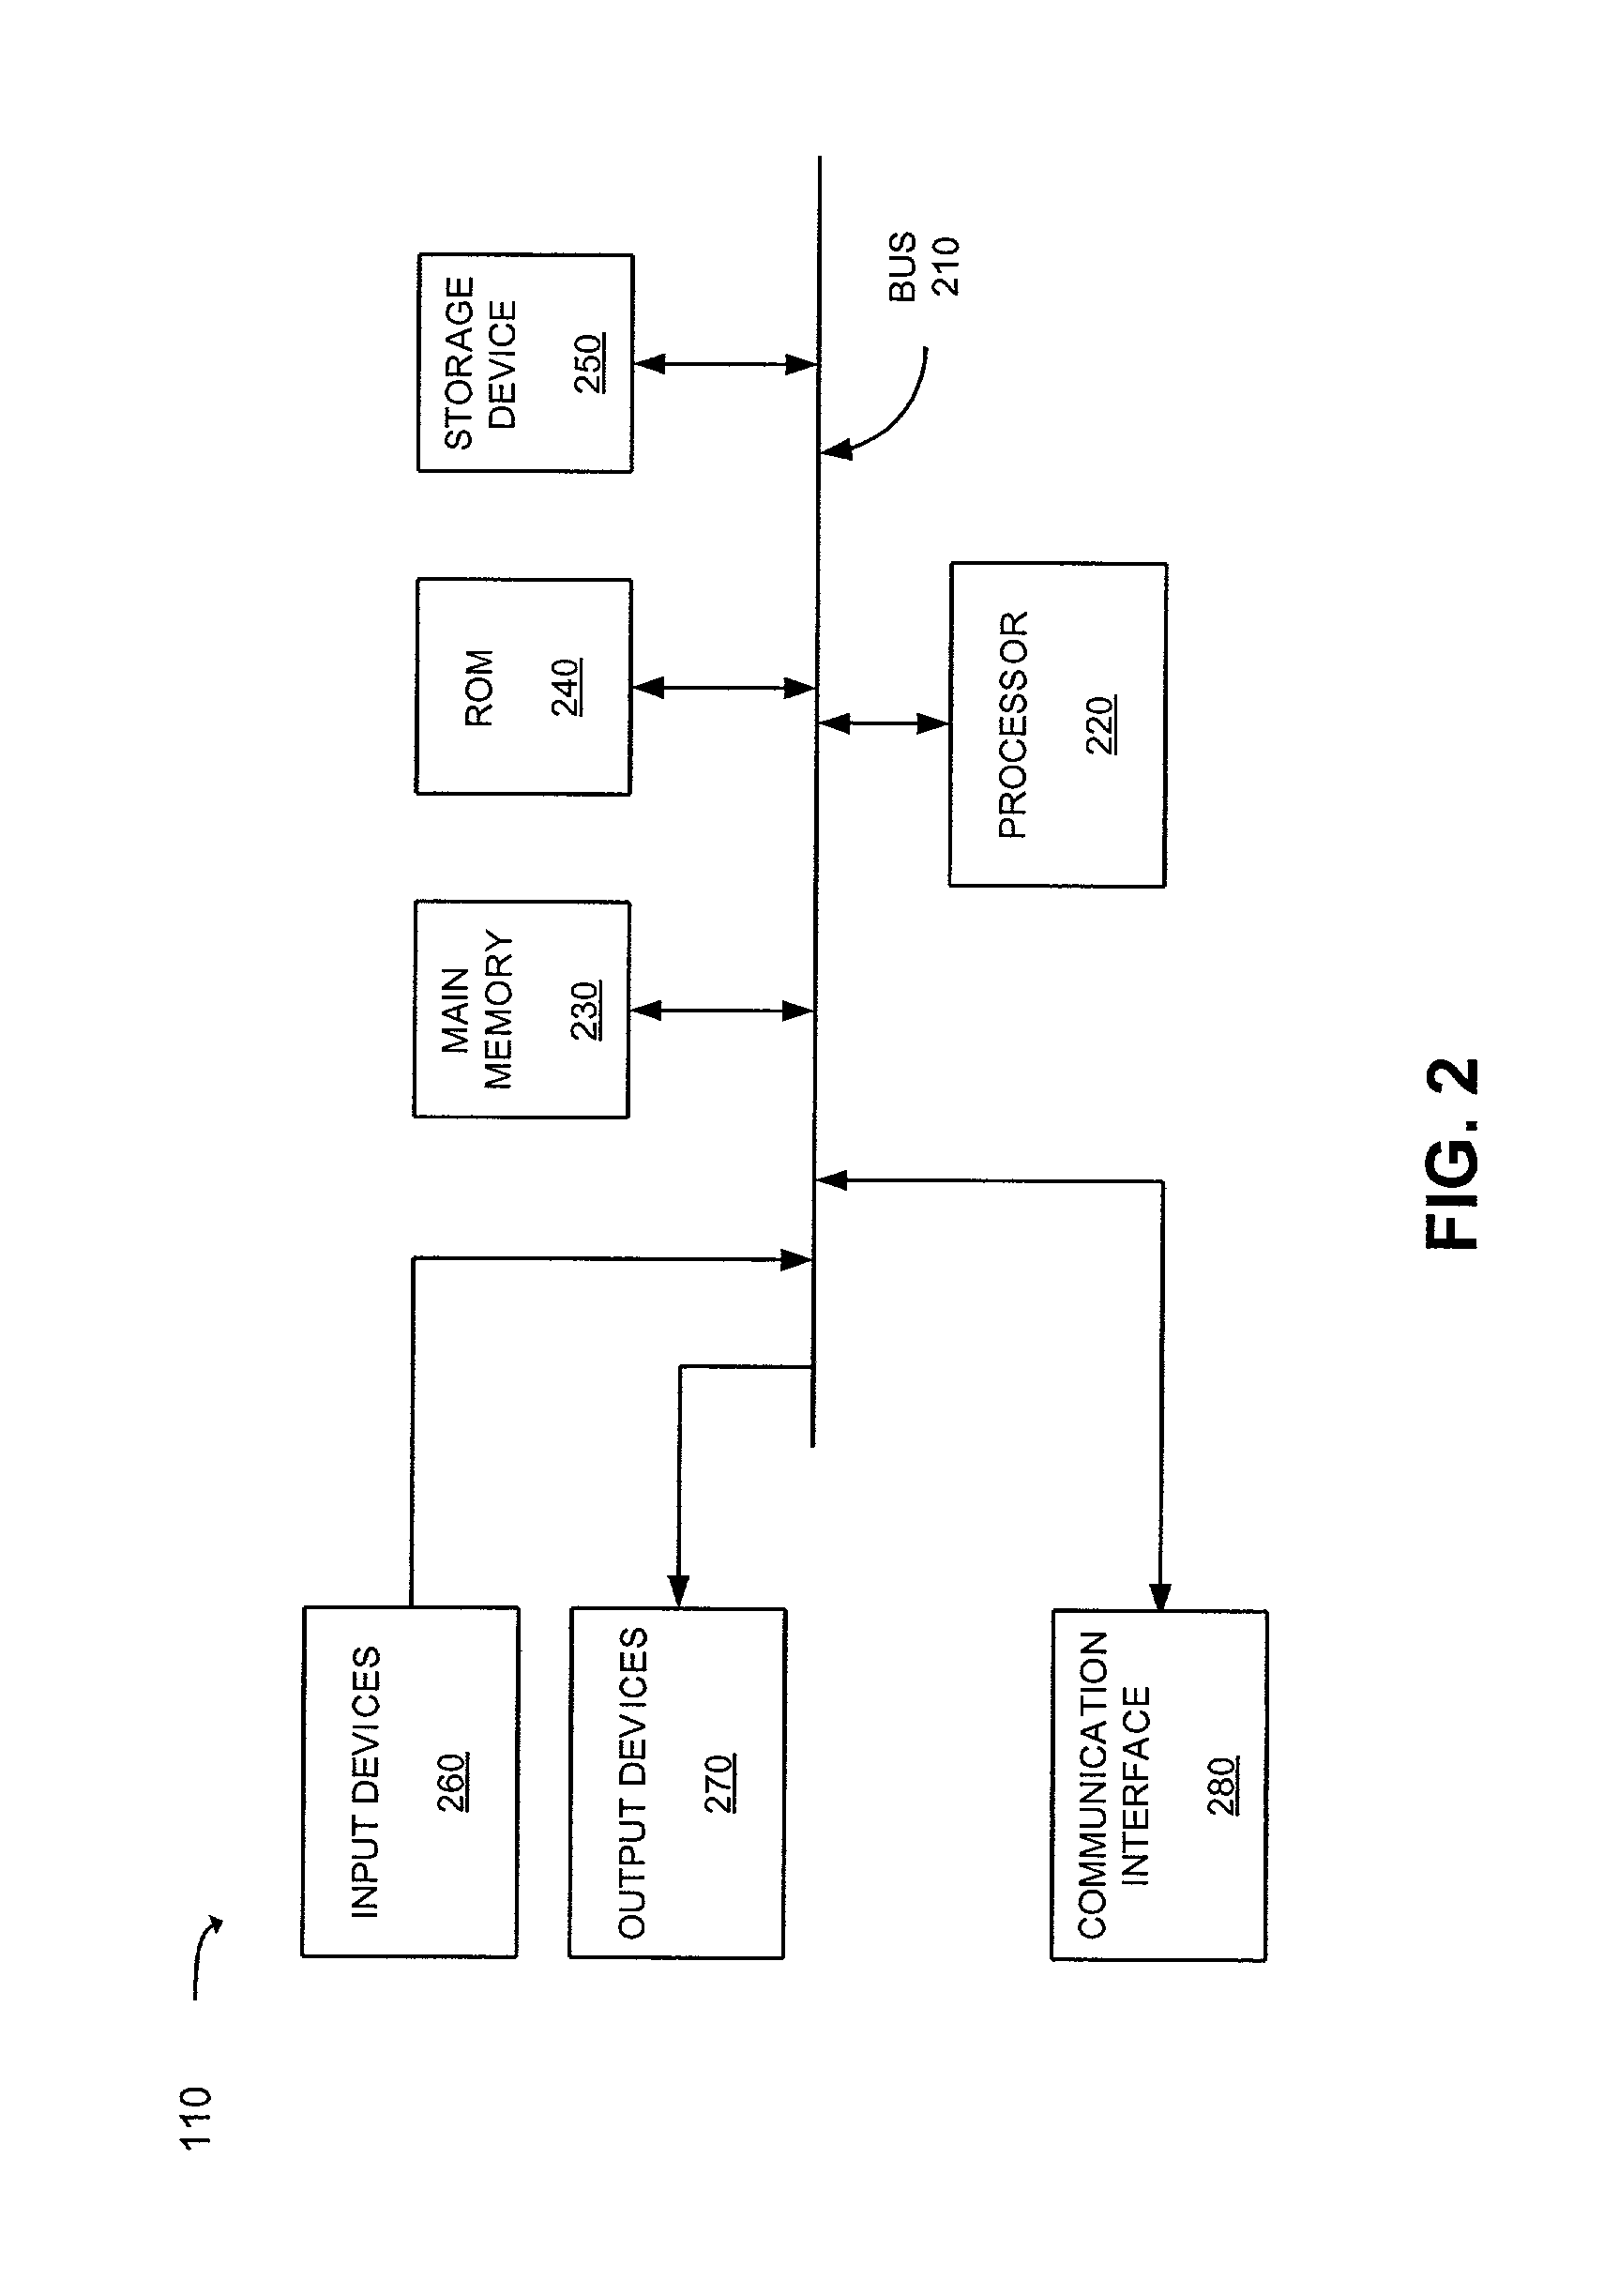 Methods and apparatus for providing search results in response to an ambiguous search query